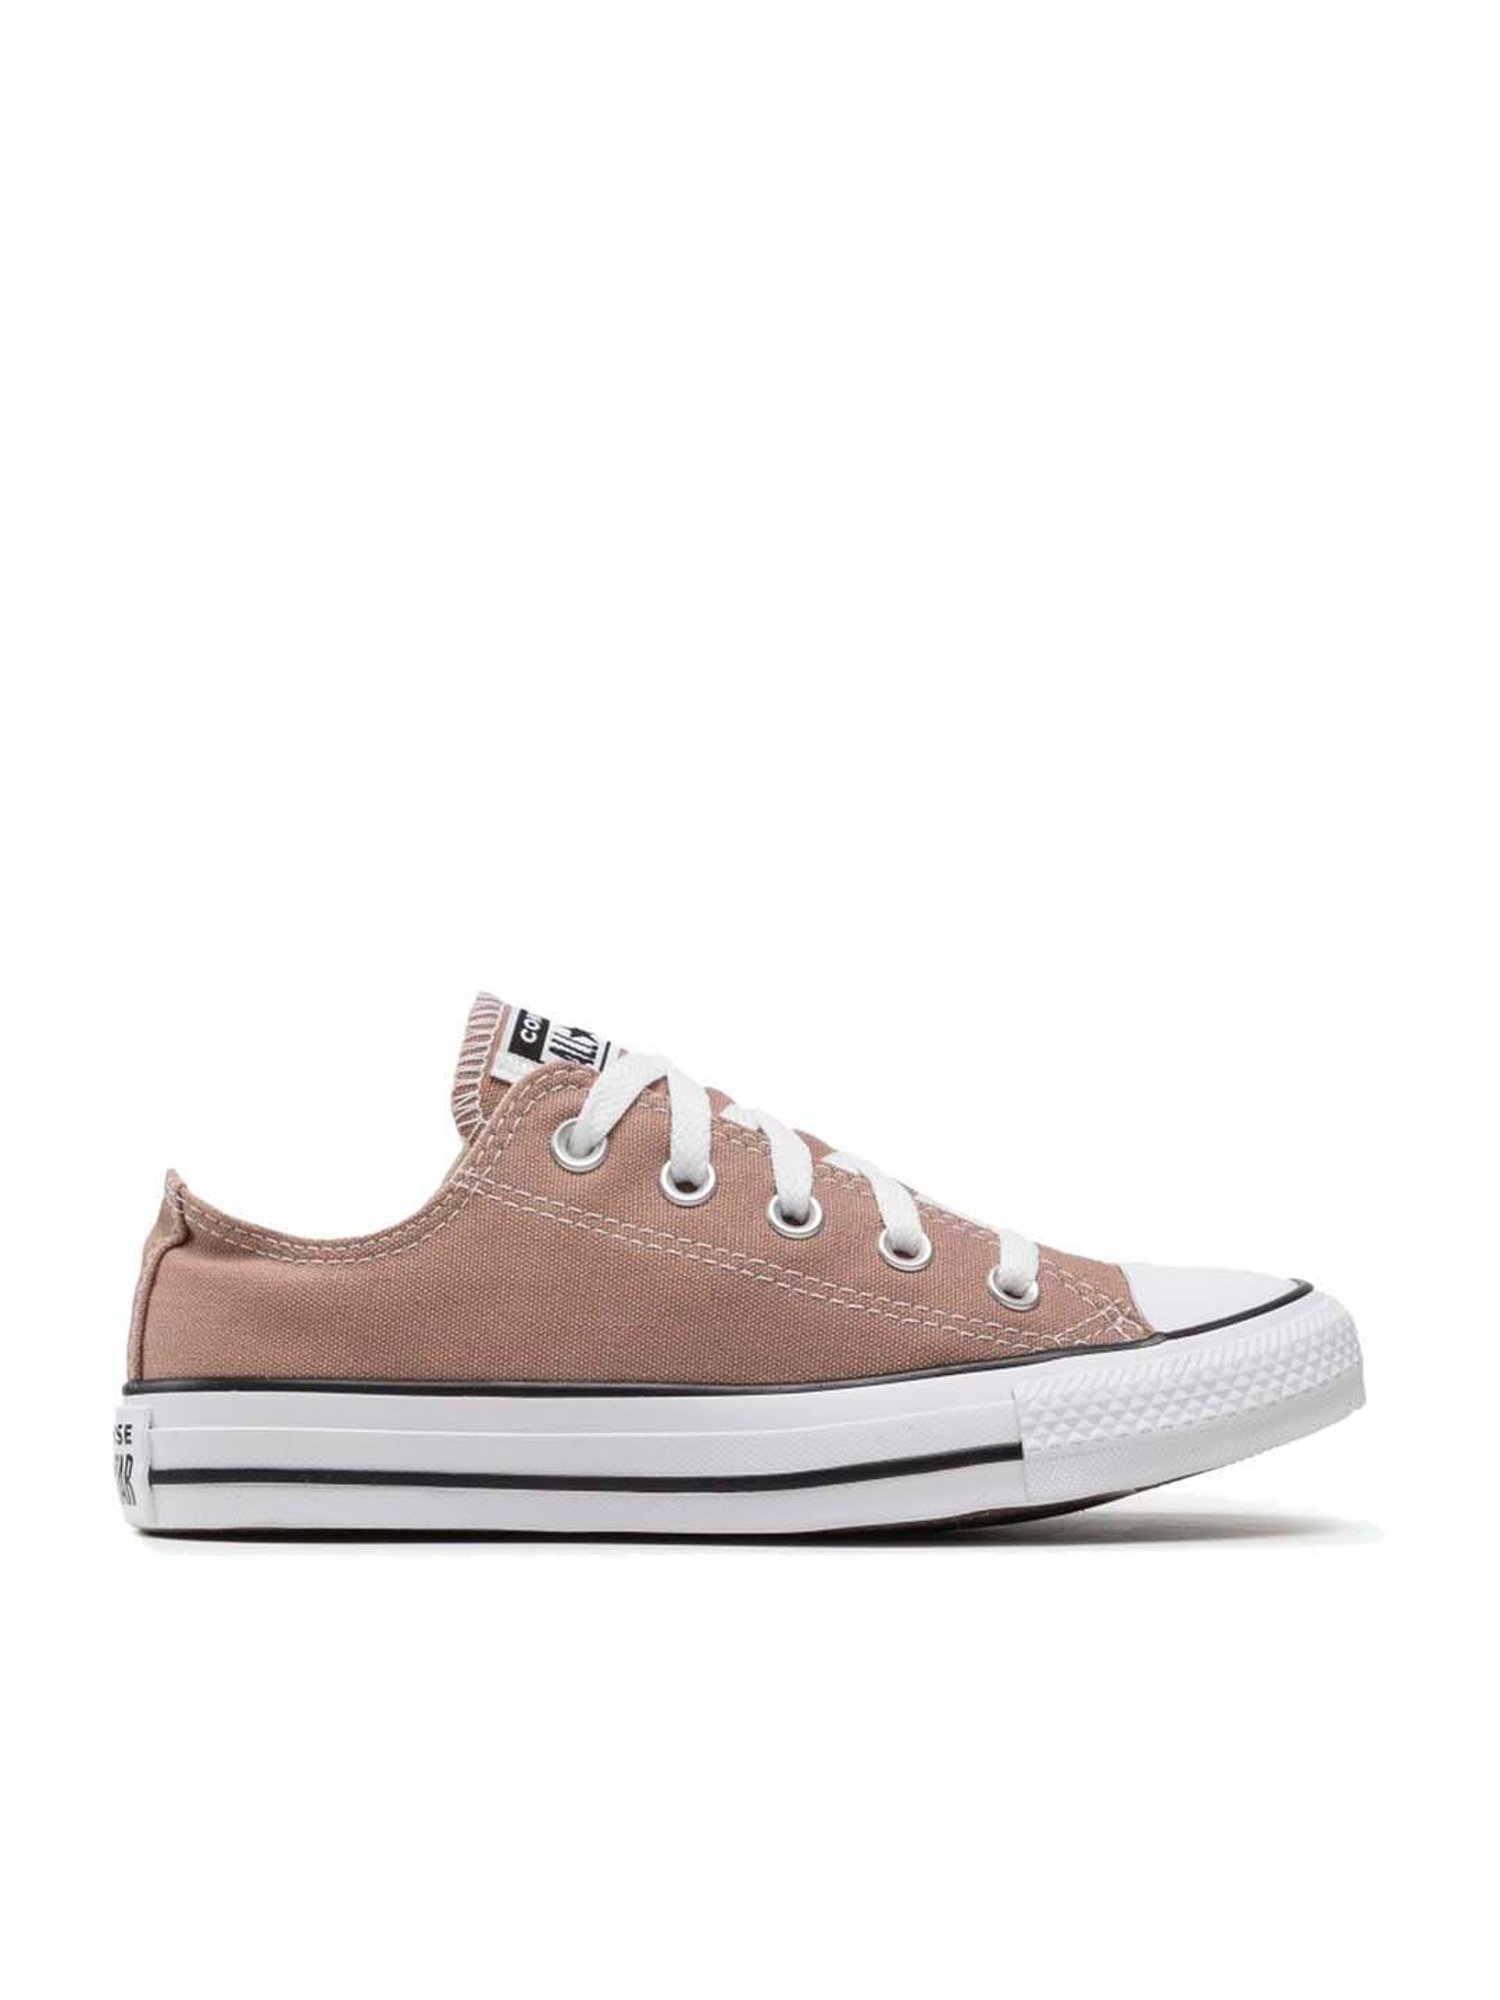 Converse Brown Leather Sneaker For Men